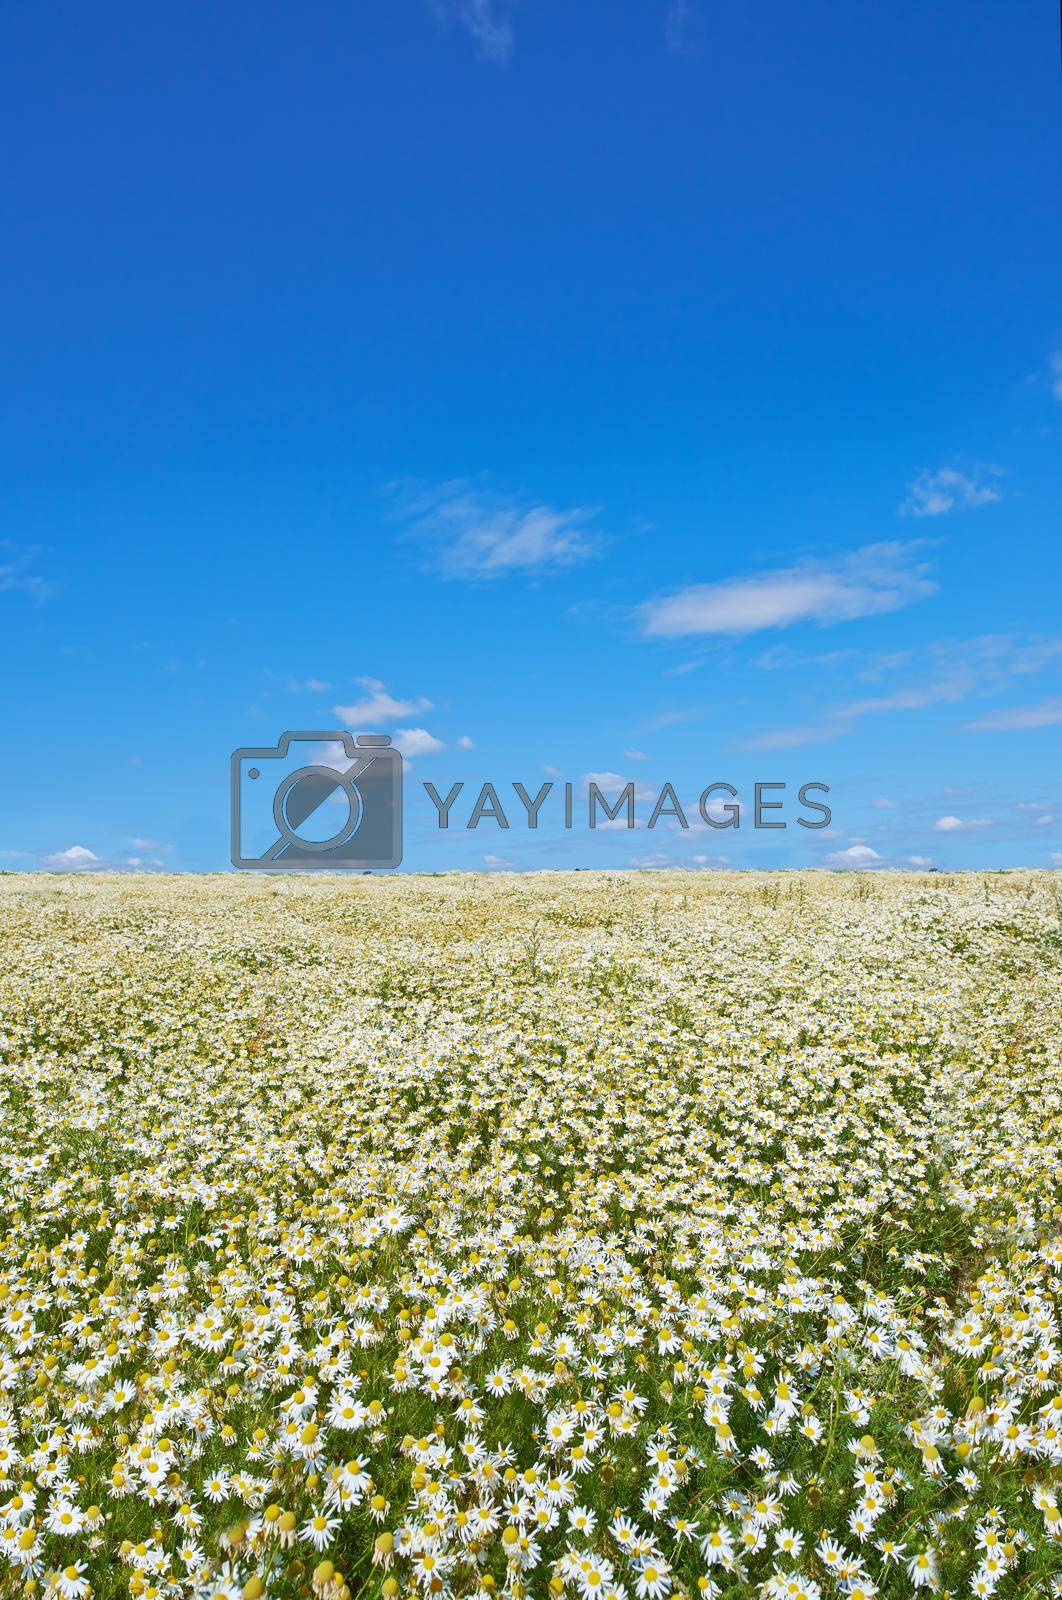 Royalty free image of Idyllic summer scene. A landscape photo of a green field and blue sky. by YuriArcurs